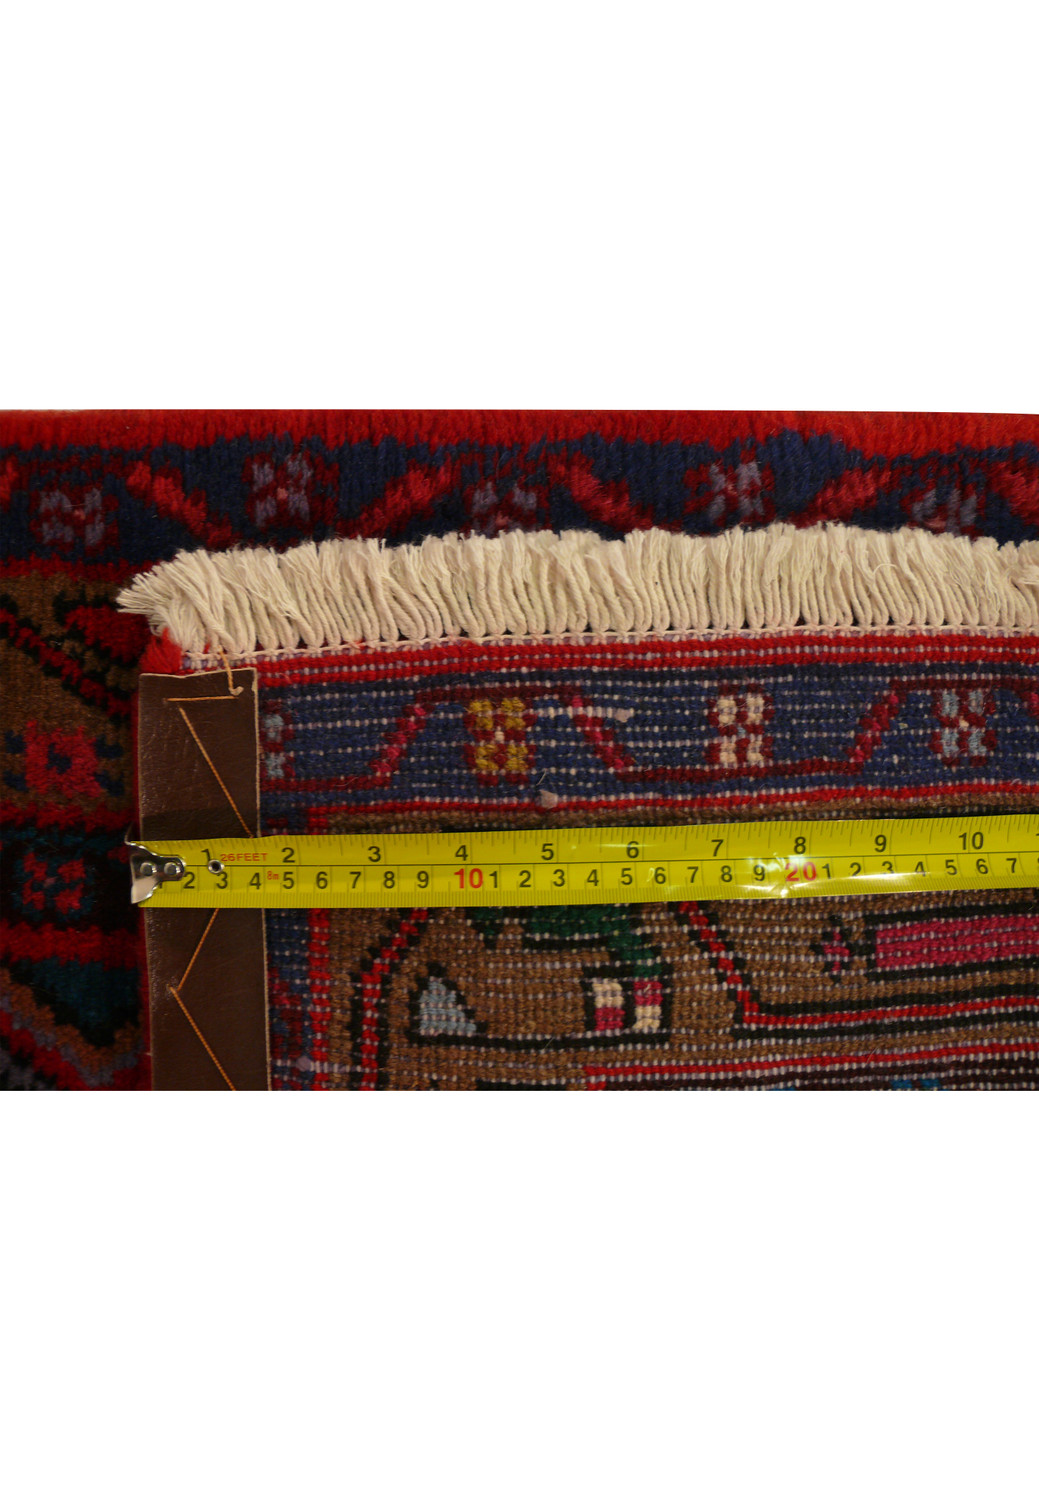 Partial fold-back view of Persian Hamedan Runner Rug revealing the underside weave and authentic hand-knotting